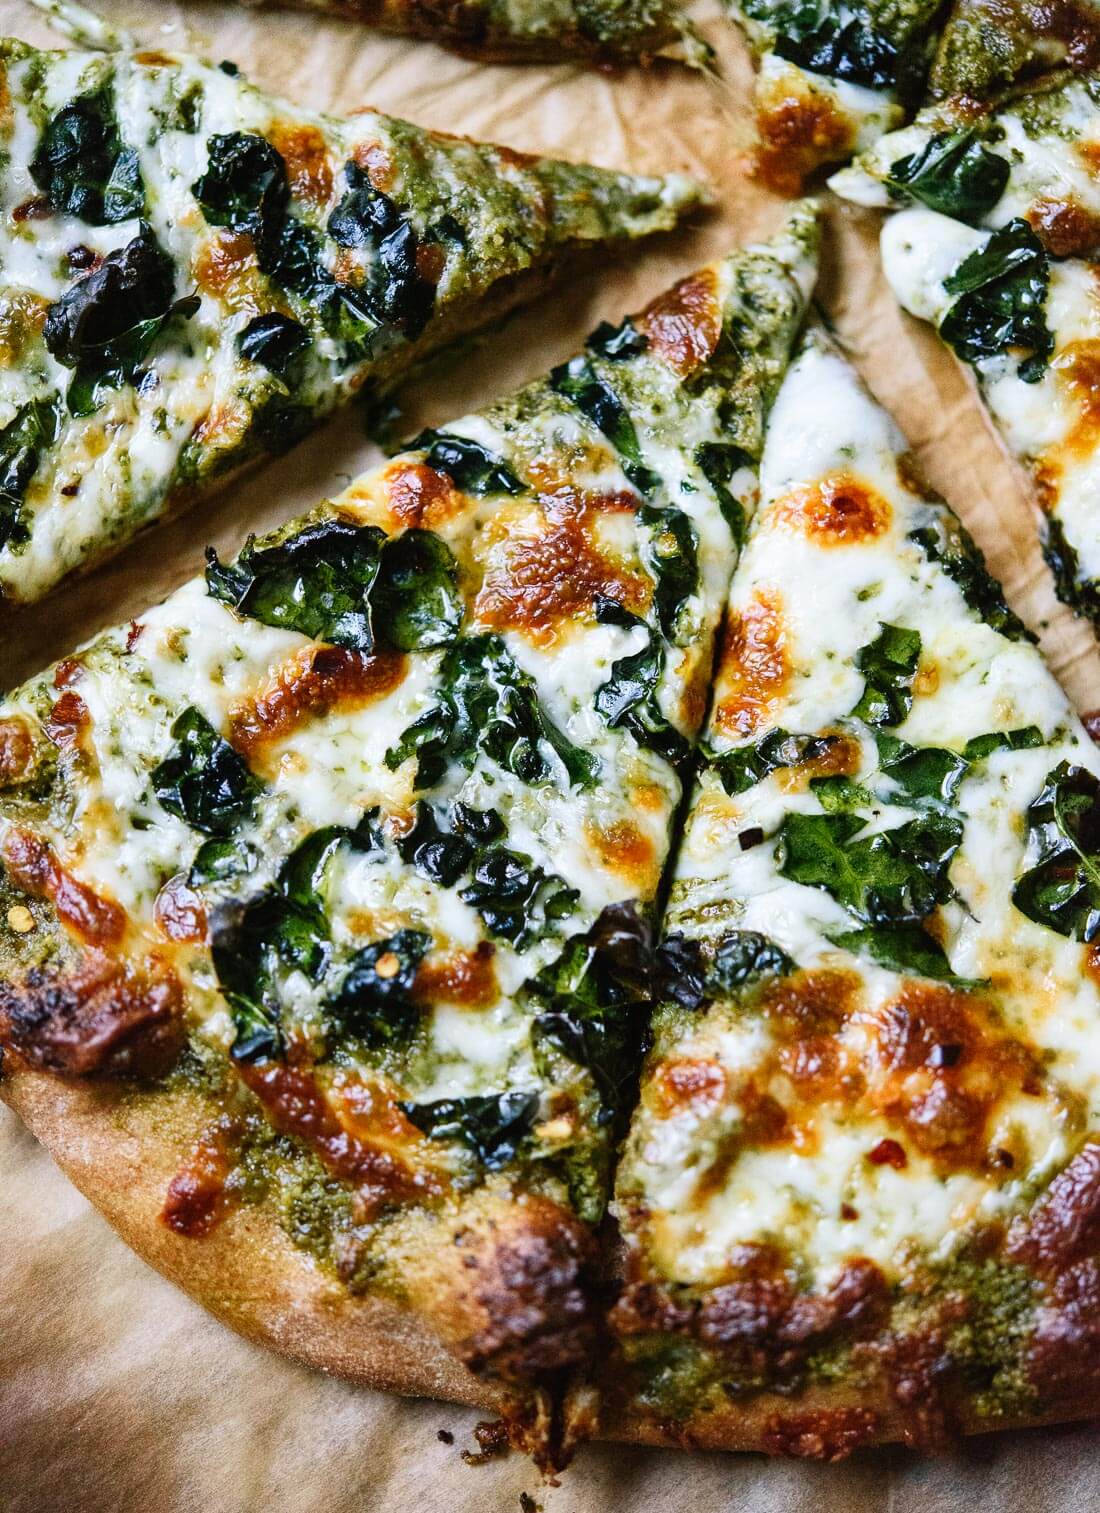 Kale pesto pizza - a simple and fun weeknight pizza! cookieandkate.com